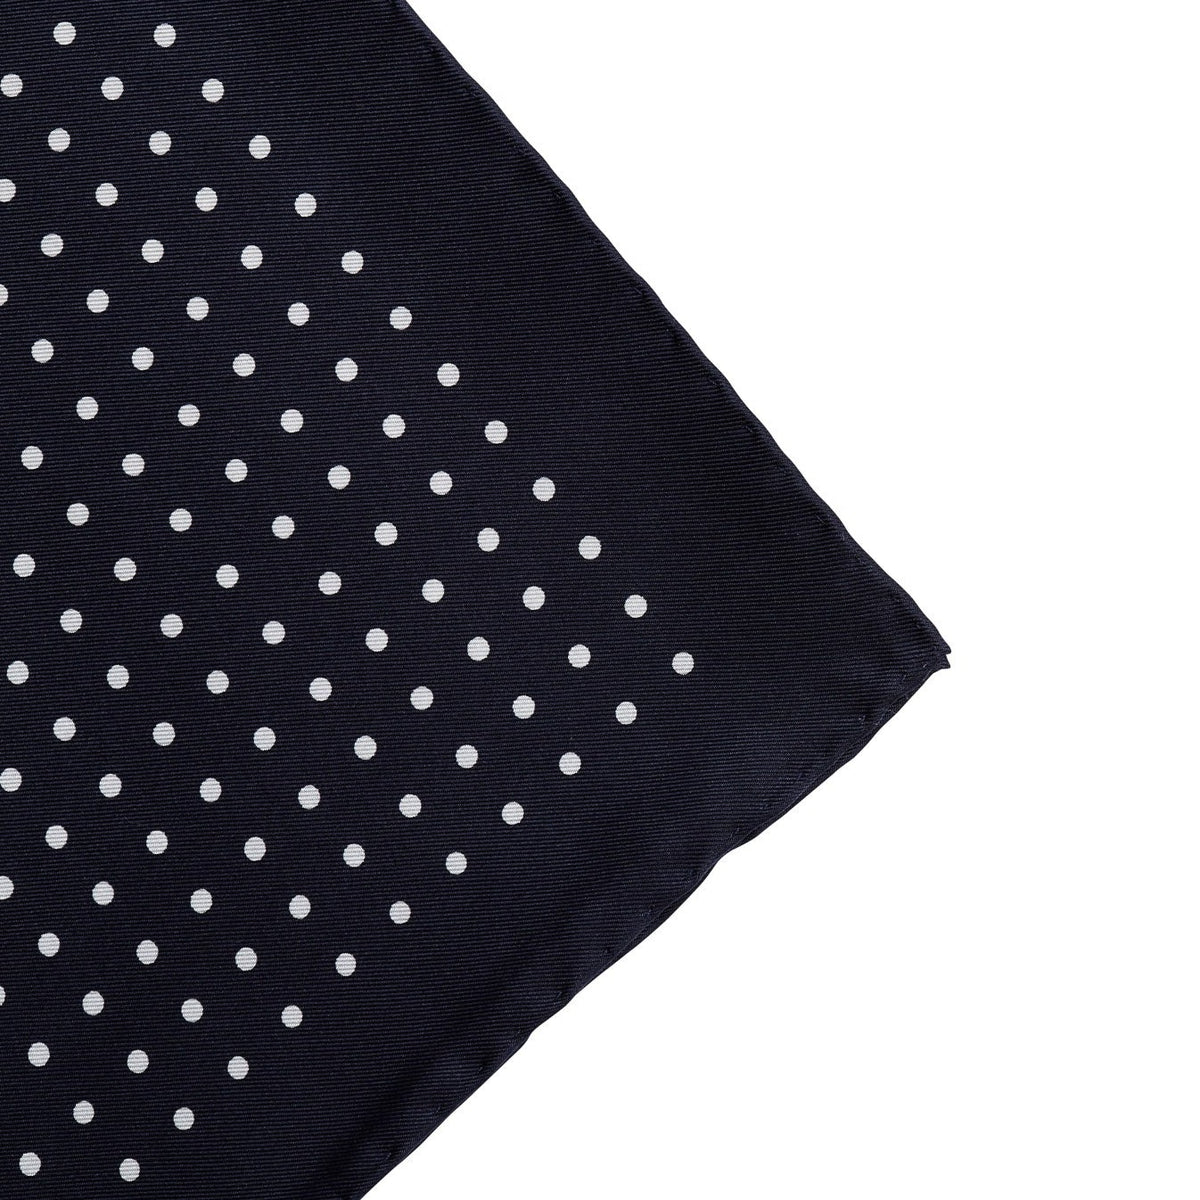 A formal Sovereign Grade 100% Silk Navy London Dot Pocket Square by KirbyAllison.com that completes any outfit.